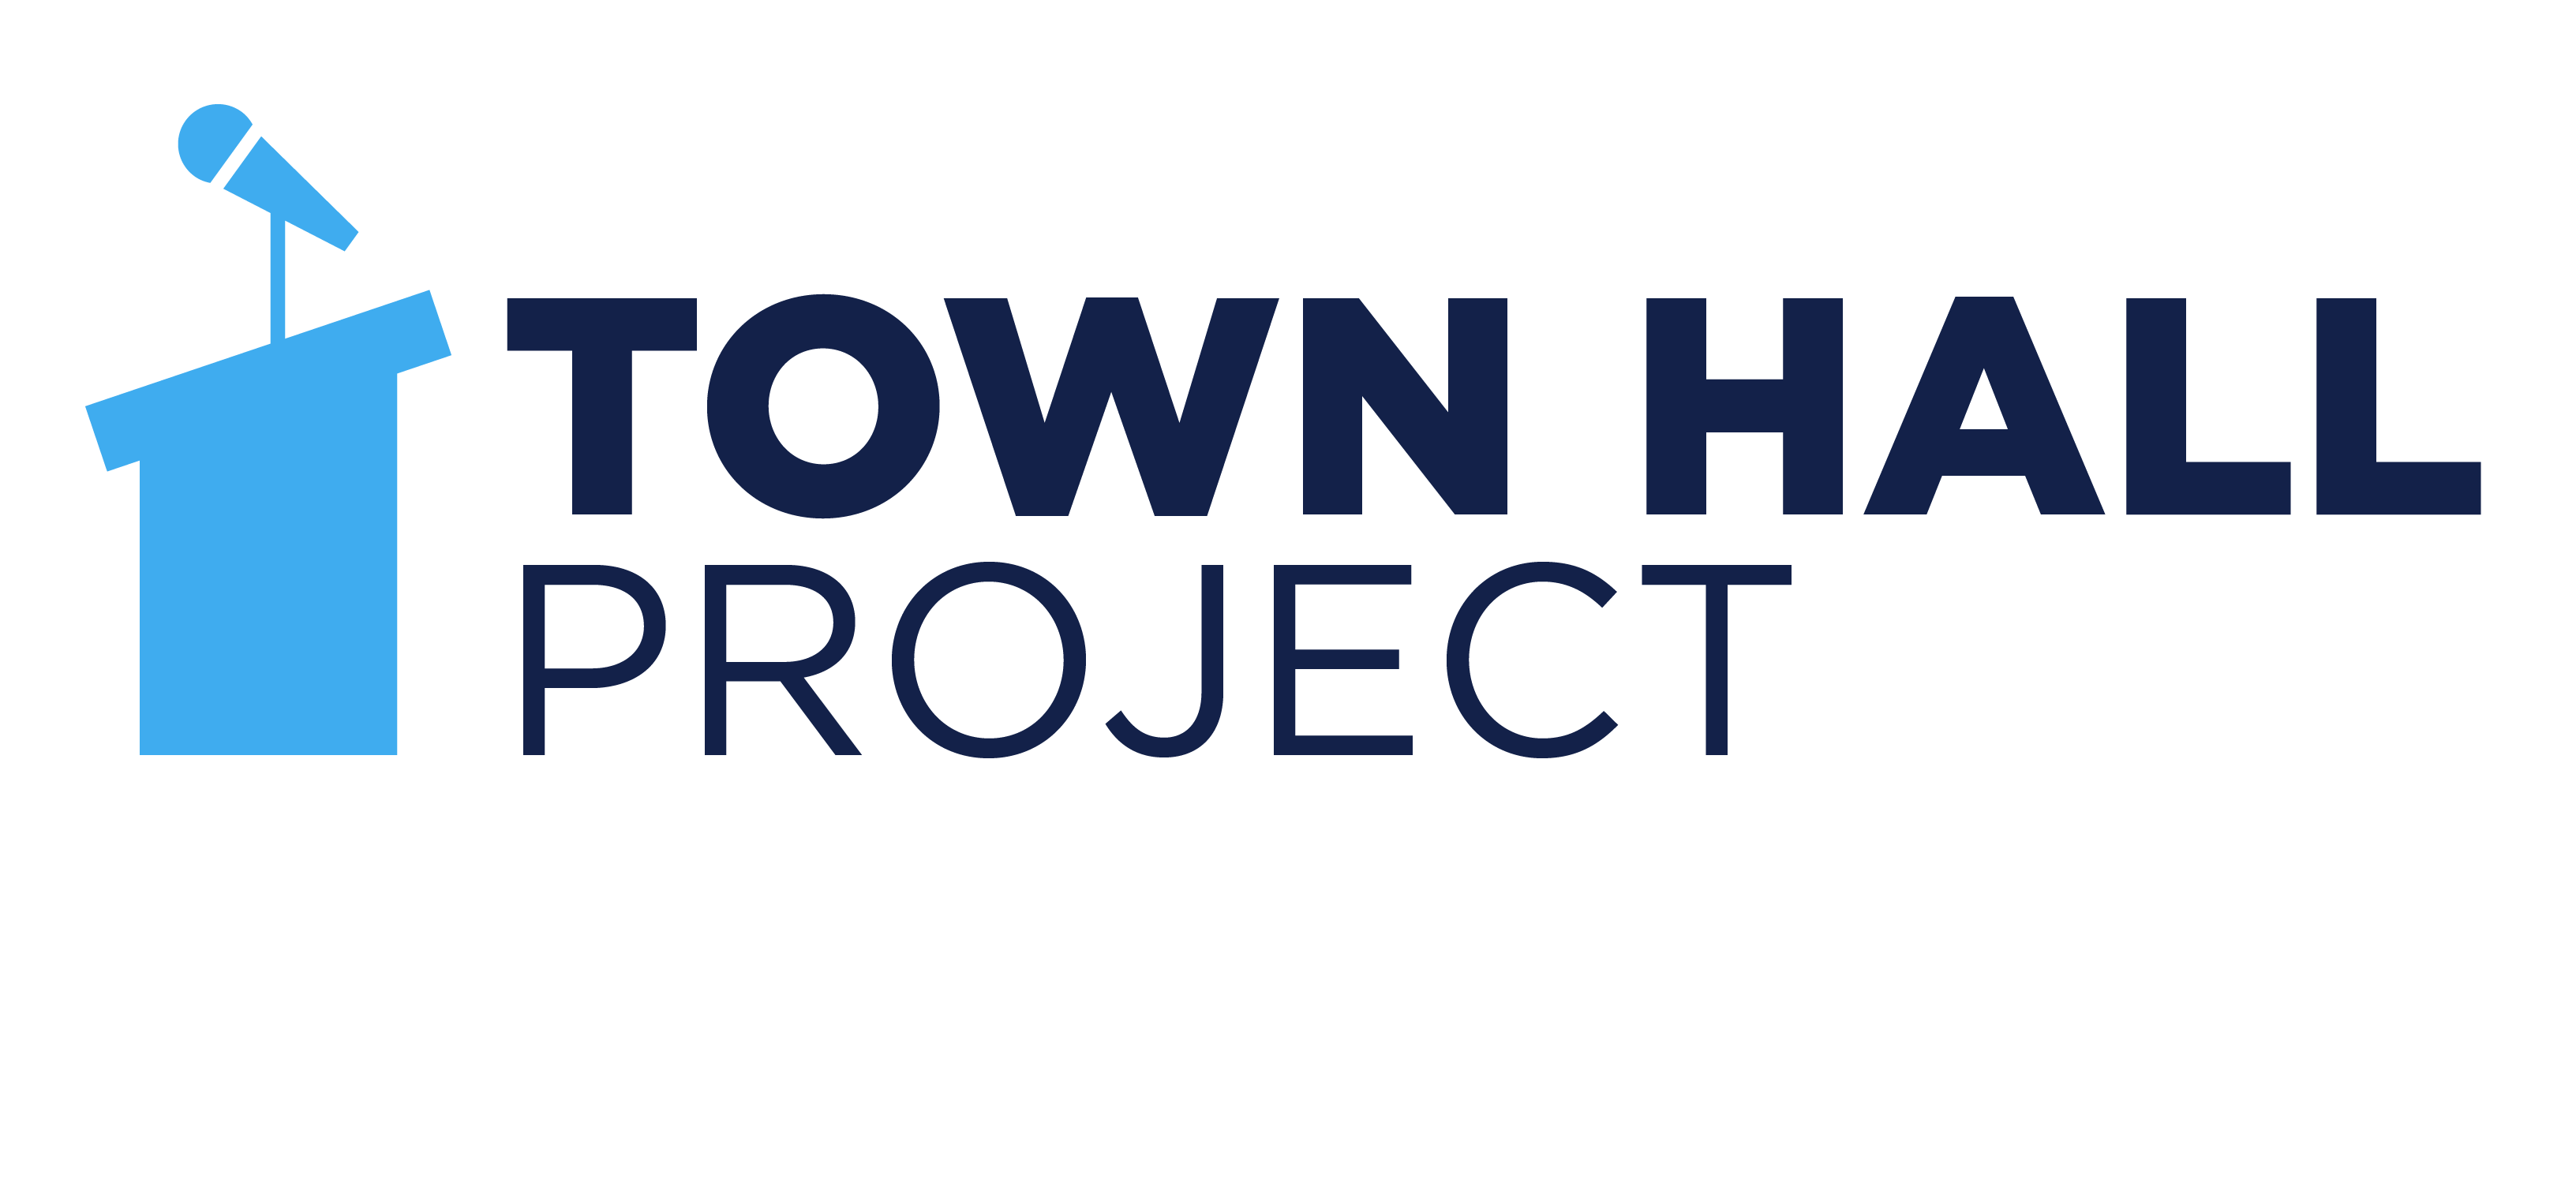 Town Hall Project - Health Care Voter